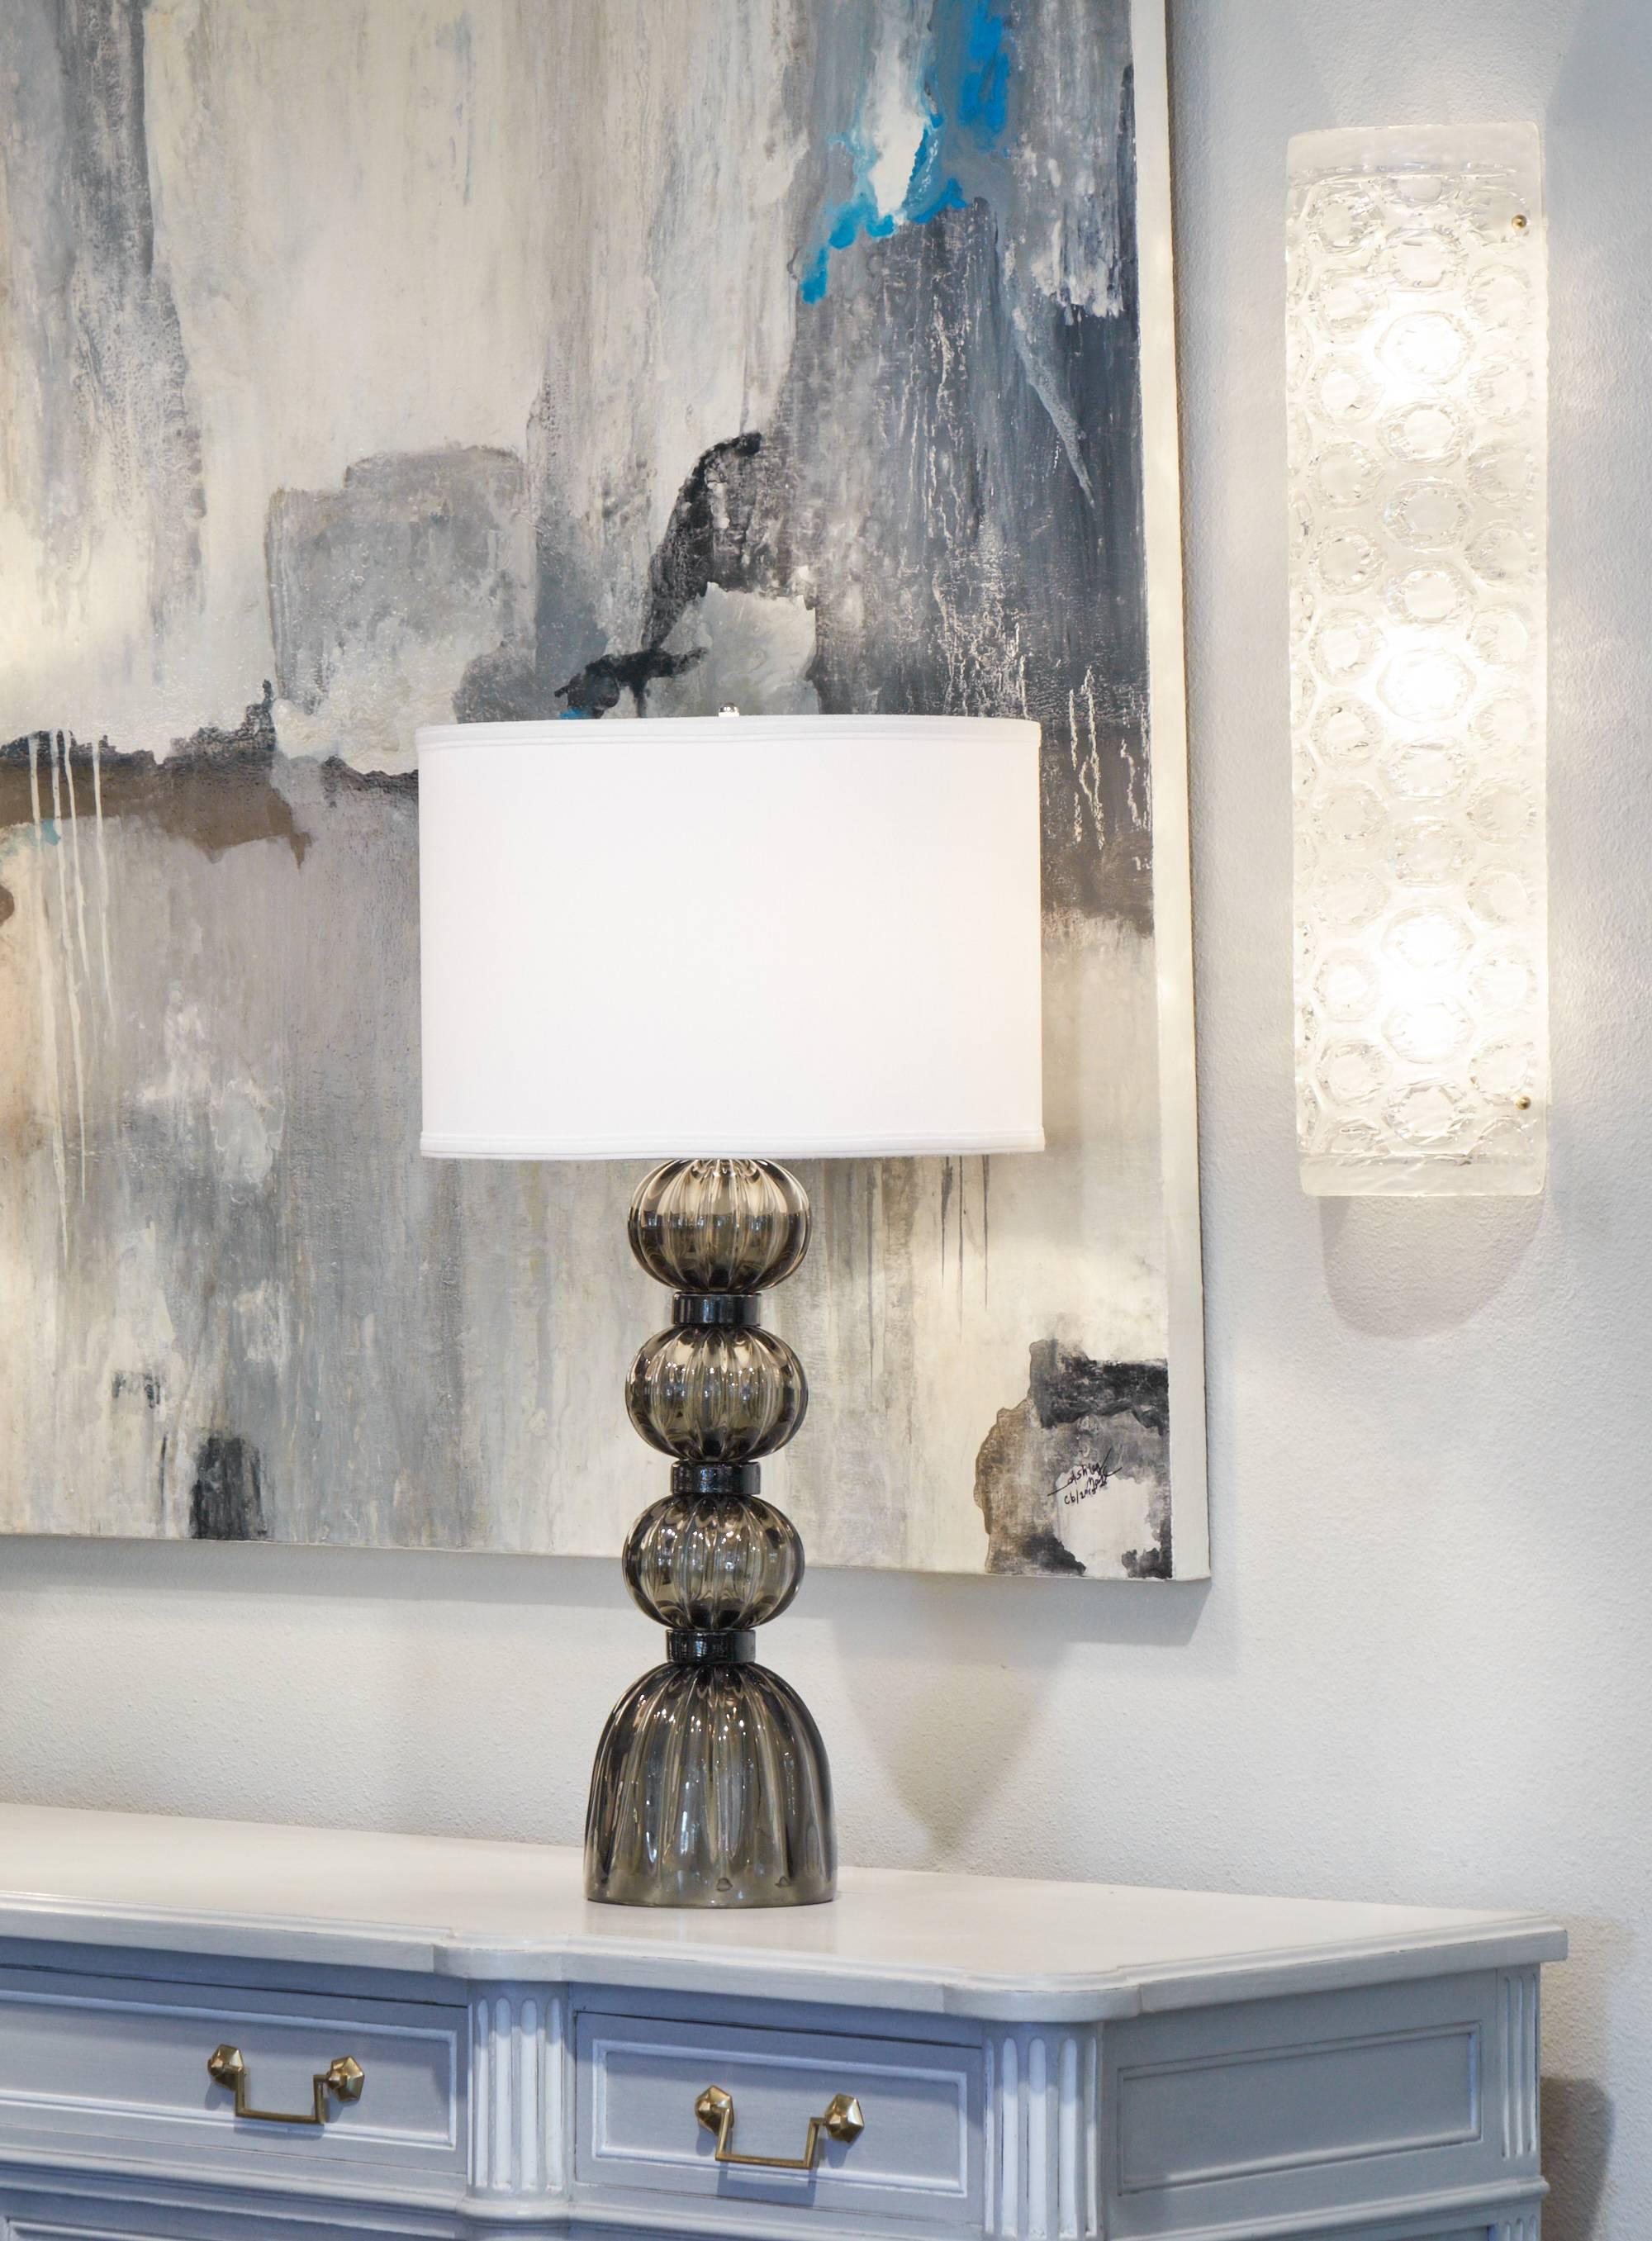 The thick luminous white stamped glass of this stunning pair of sconces will sparkle when lit or turned off. We couldn't resist their sophisticated pattern and clean 1960's glamorous design. Each sconce requires three medium-base bulb and is wired